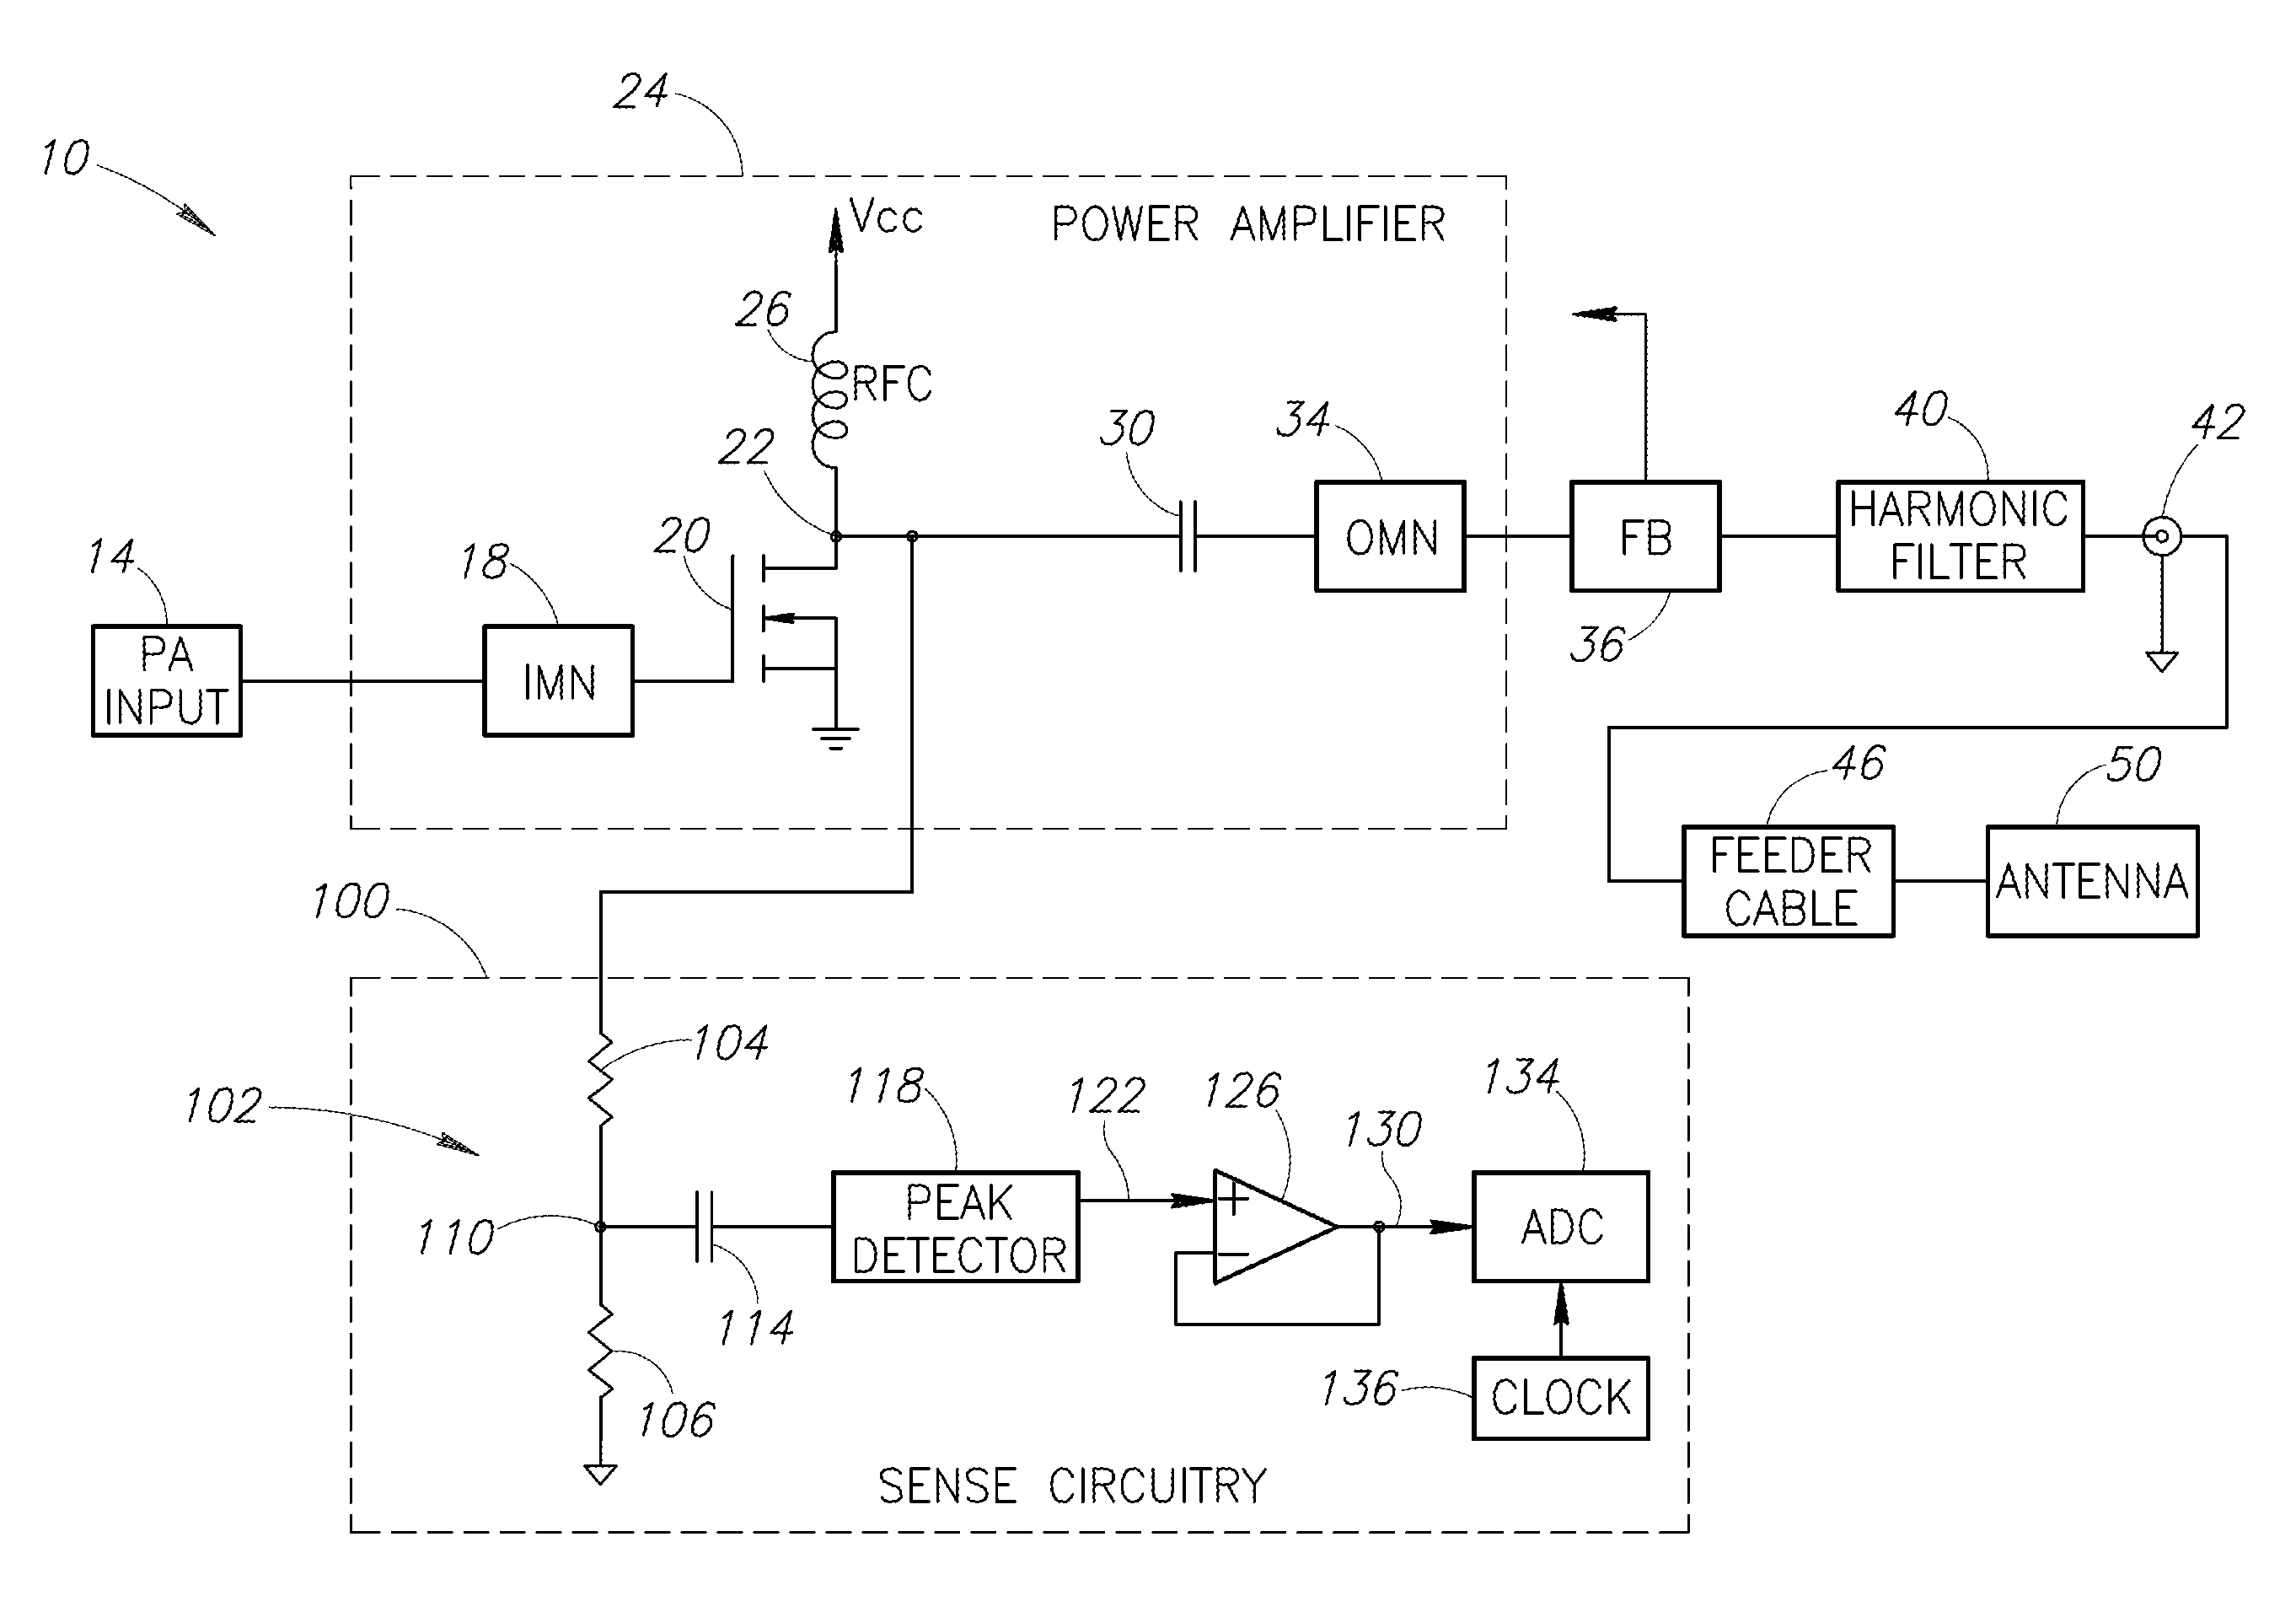 Radio frequency power amplifier protection system